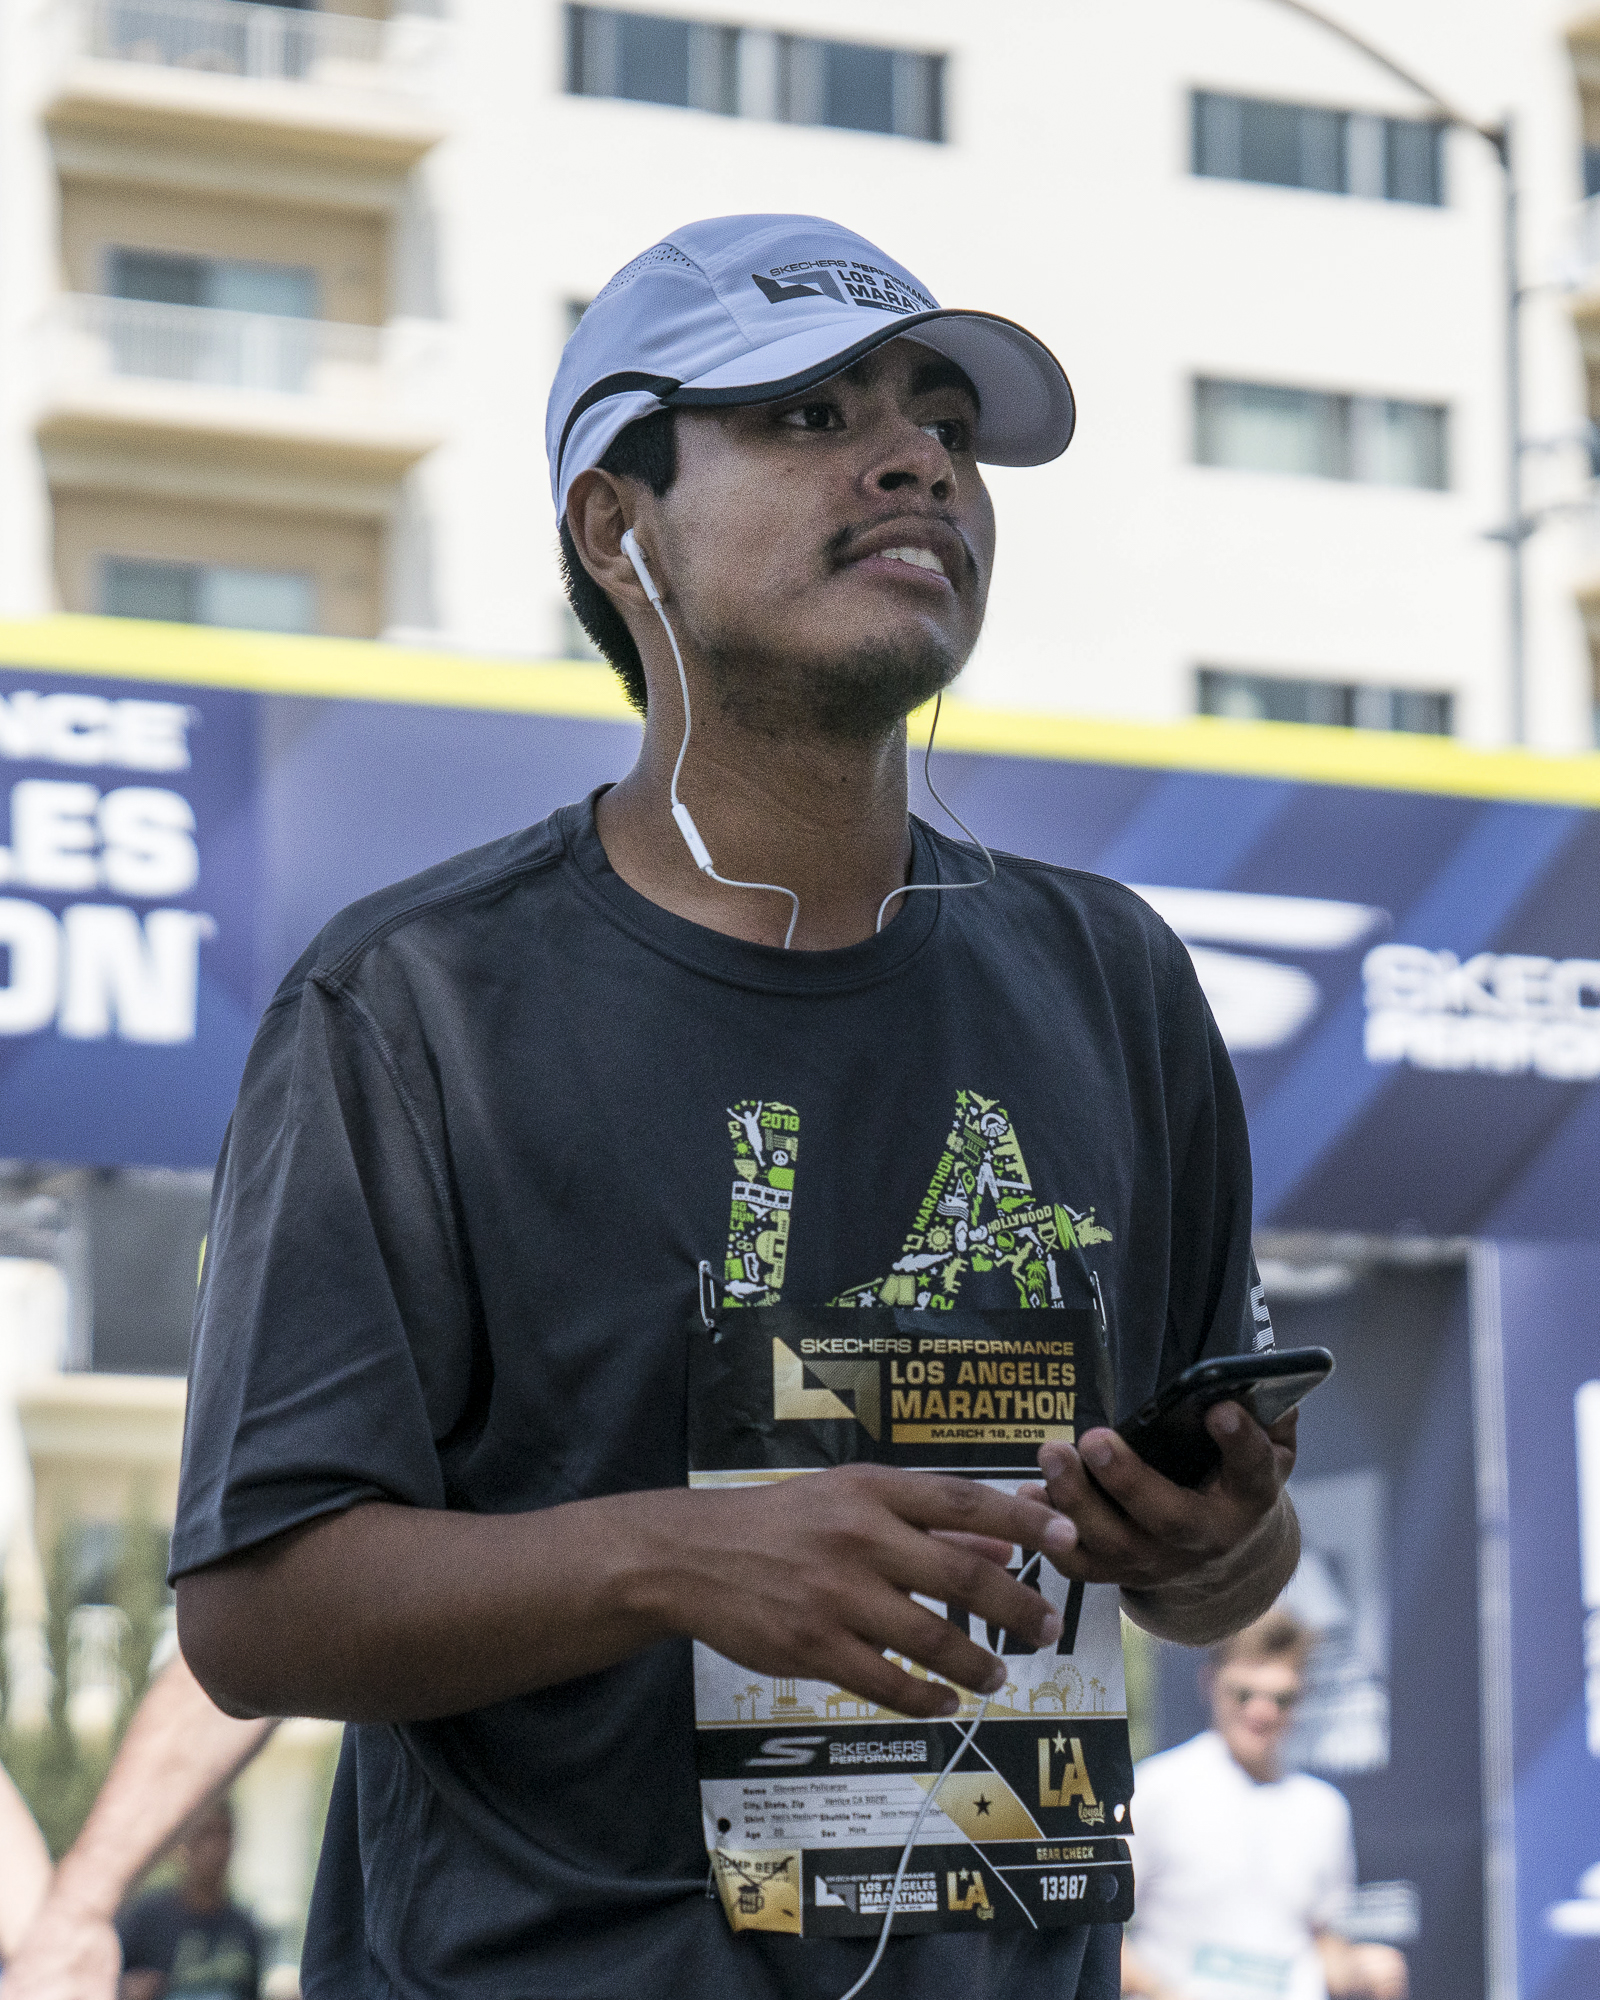  Giovanni Policarpo, an SMC student, just after crossing the finish line at the Los Angeles Marathon in Santa Monica, California on Sunday, March 18, 2018. This was Policarpo's third straight marathon. (Photo by: Helena Sung) 